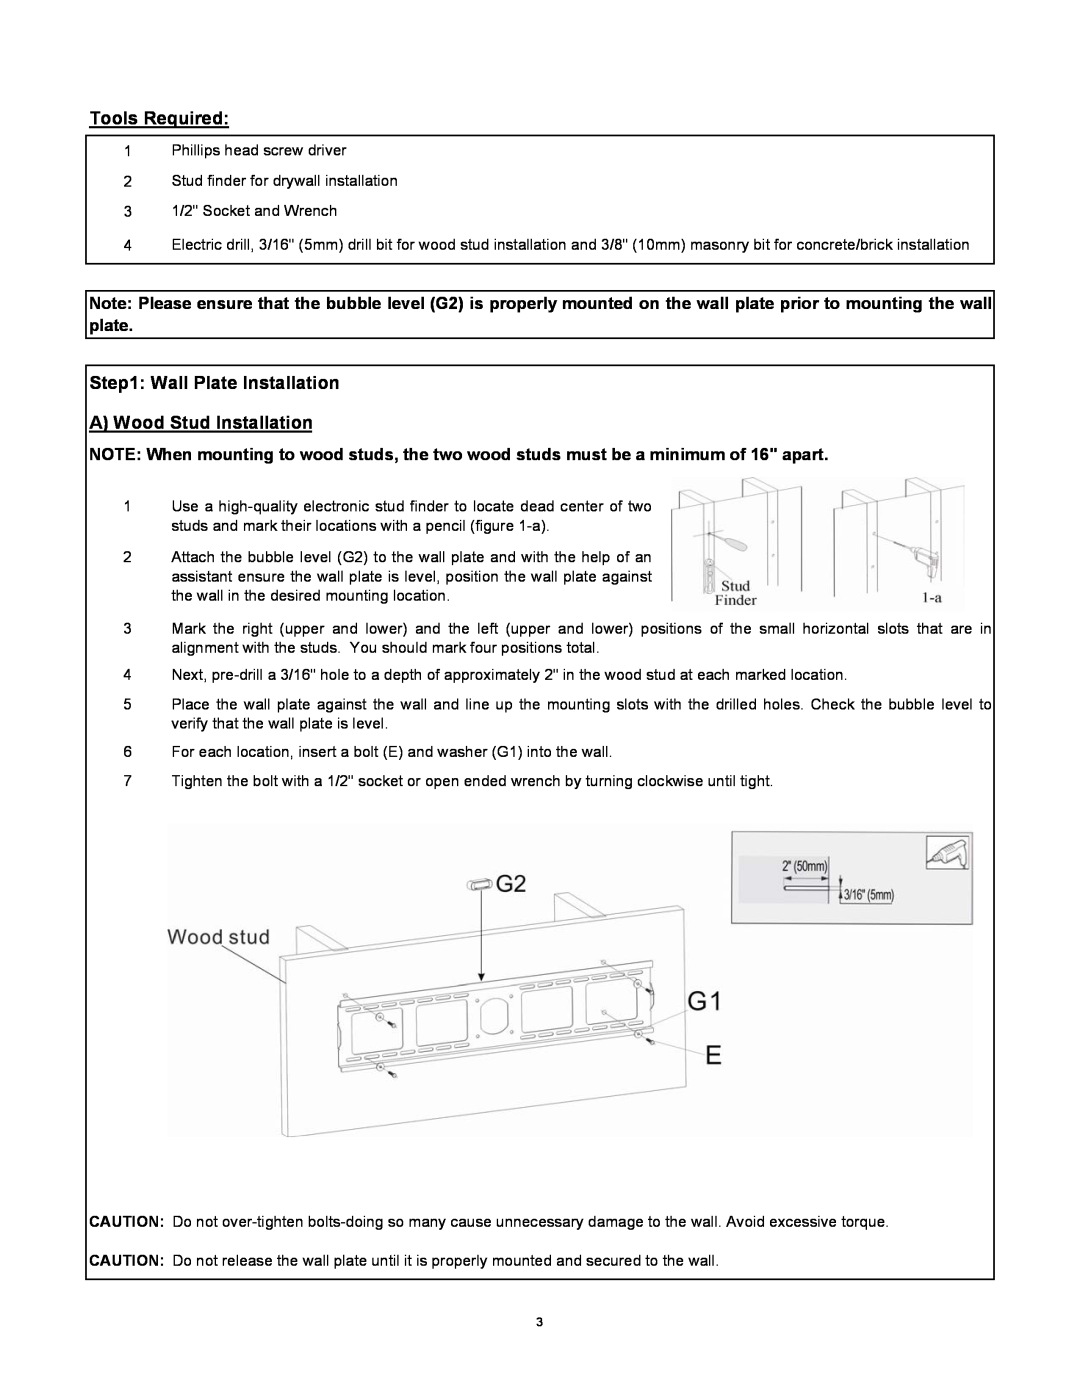 SIIG L2756 installation instructions Tools Required, Wall Plate Installation A Wood Stud Installation 